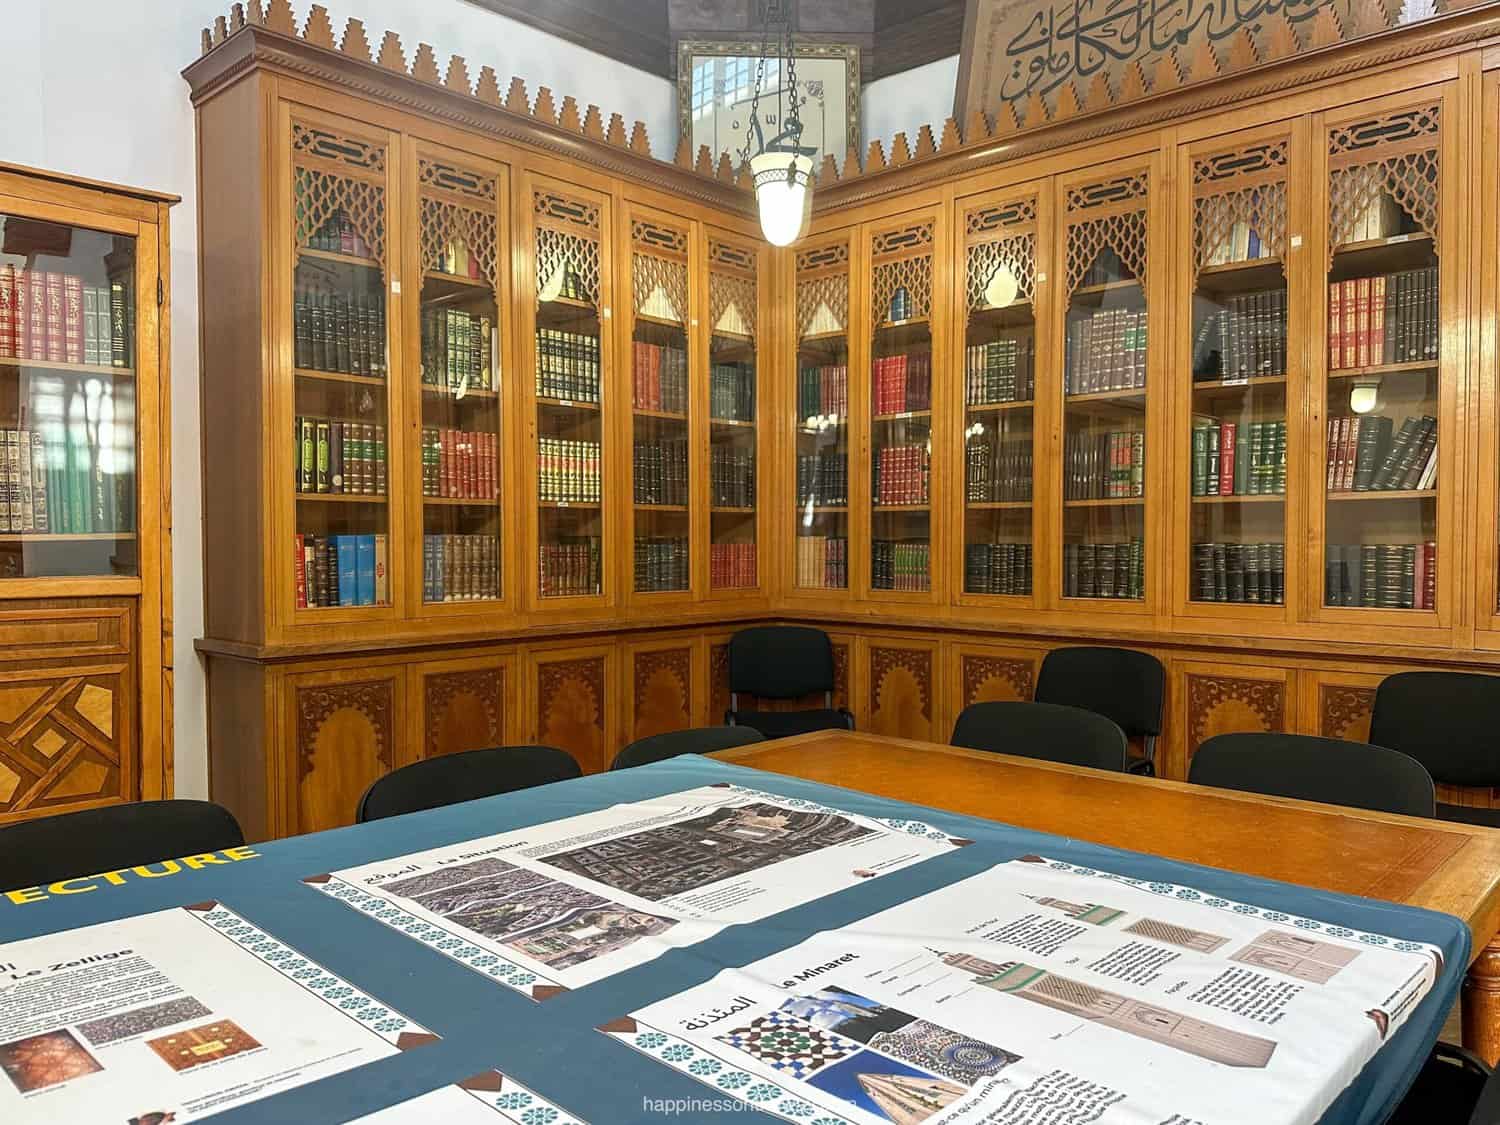 Interior of the Paris Grand Mosque library with wooden bookshelves and numerous books.